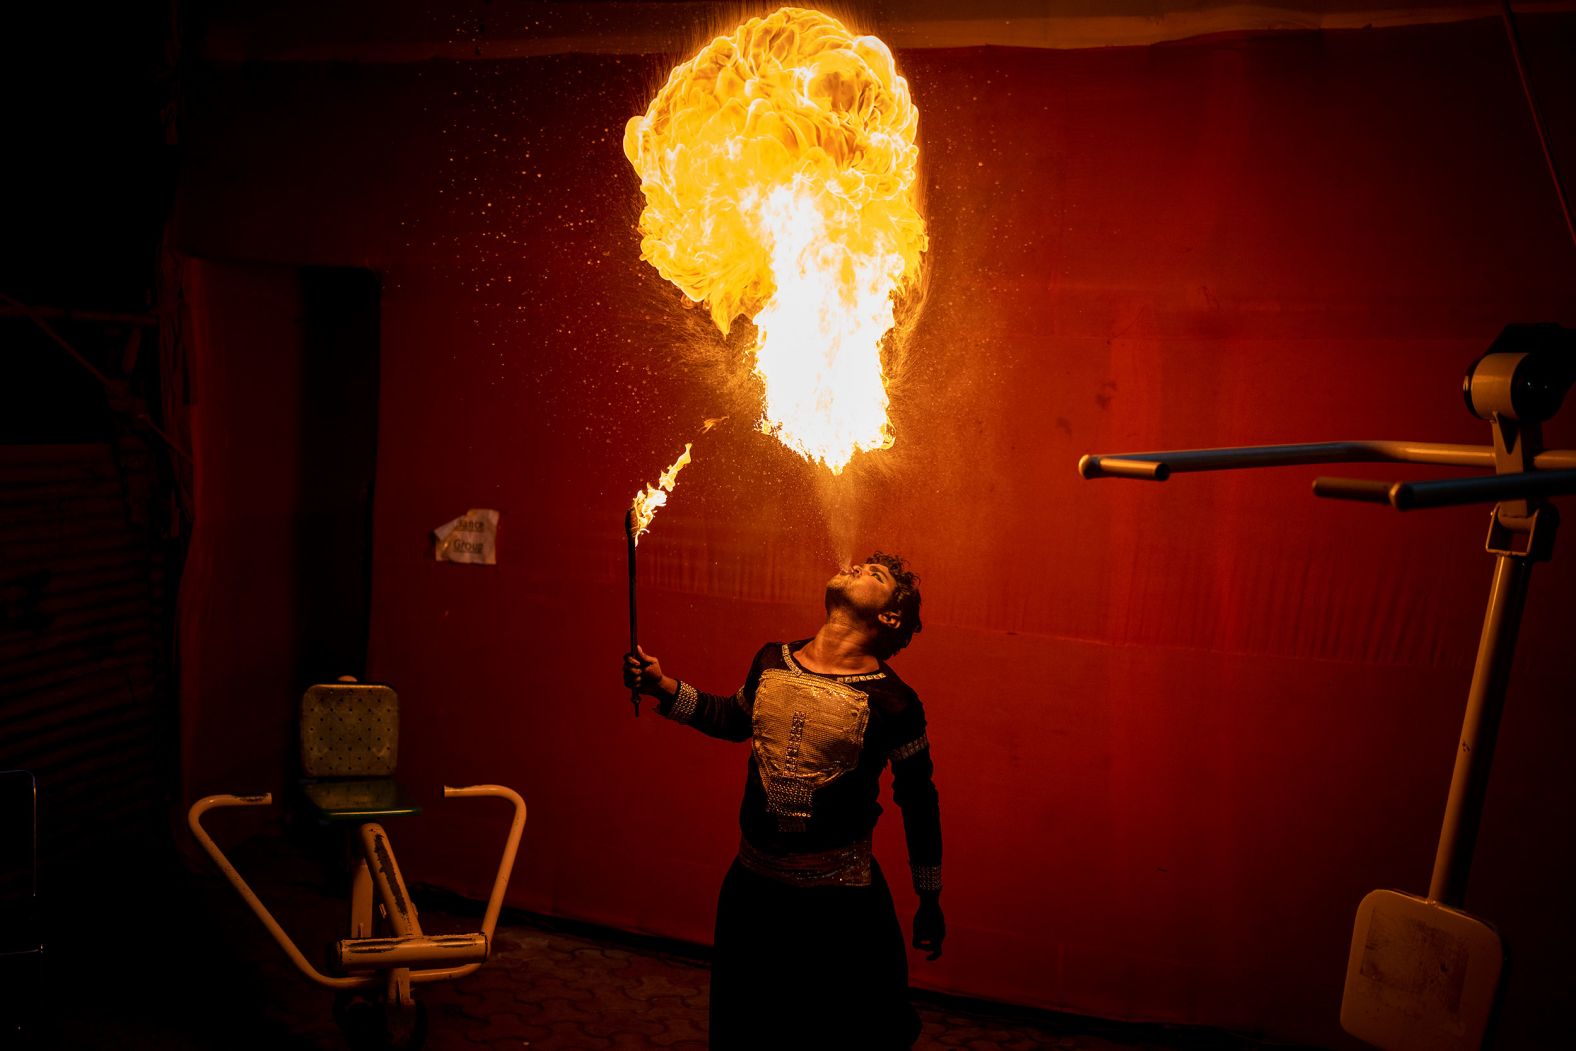 An artist practices spitting fire backstage before a performance during the Dussehra festival in New Delhi, India, on Wednesday, October 5. 